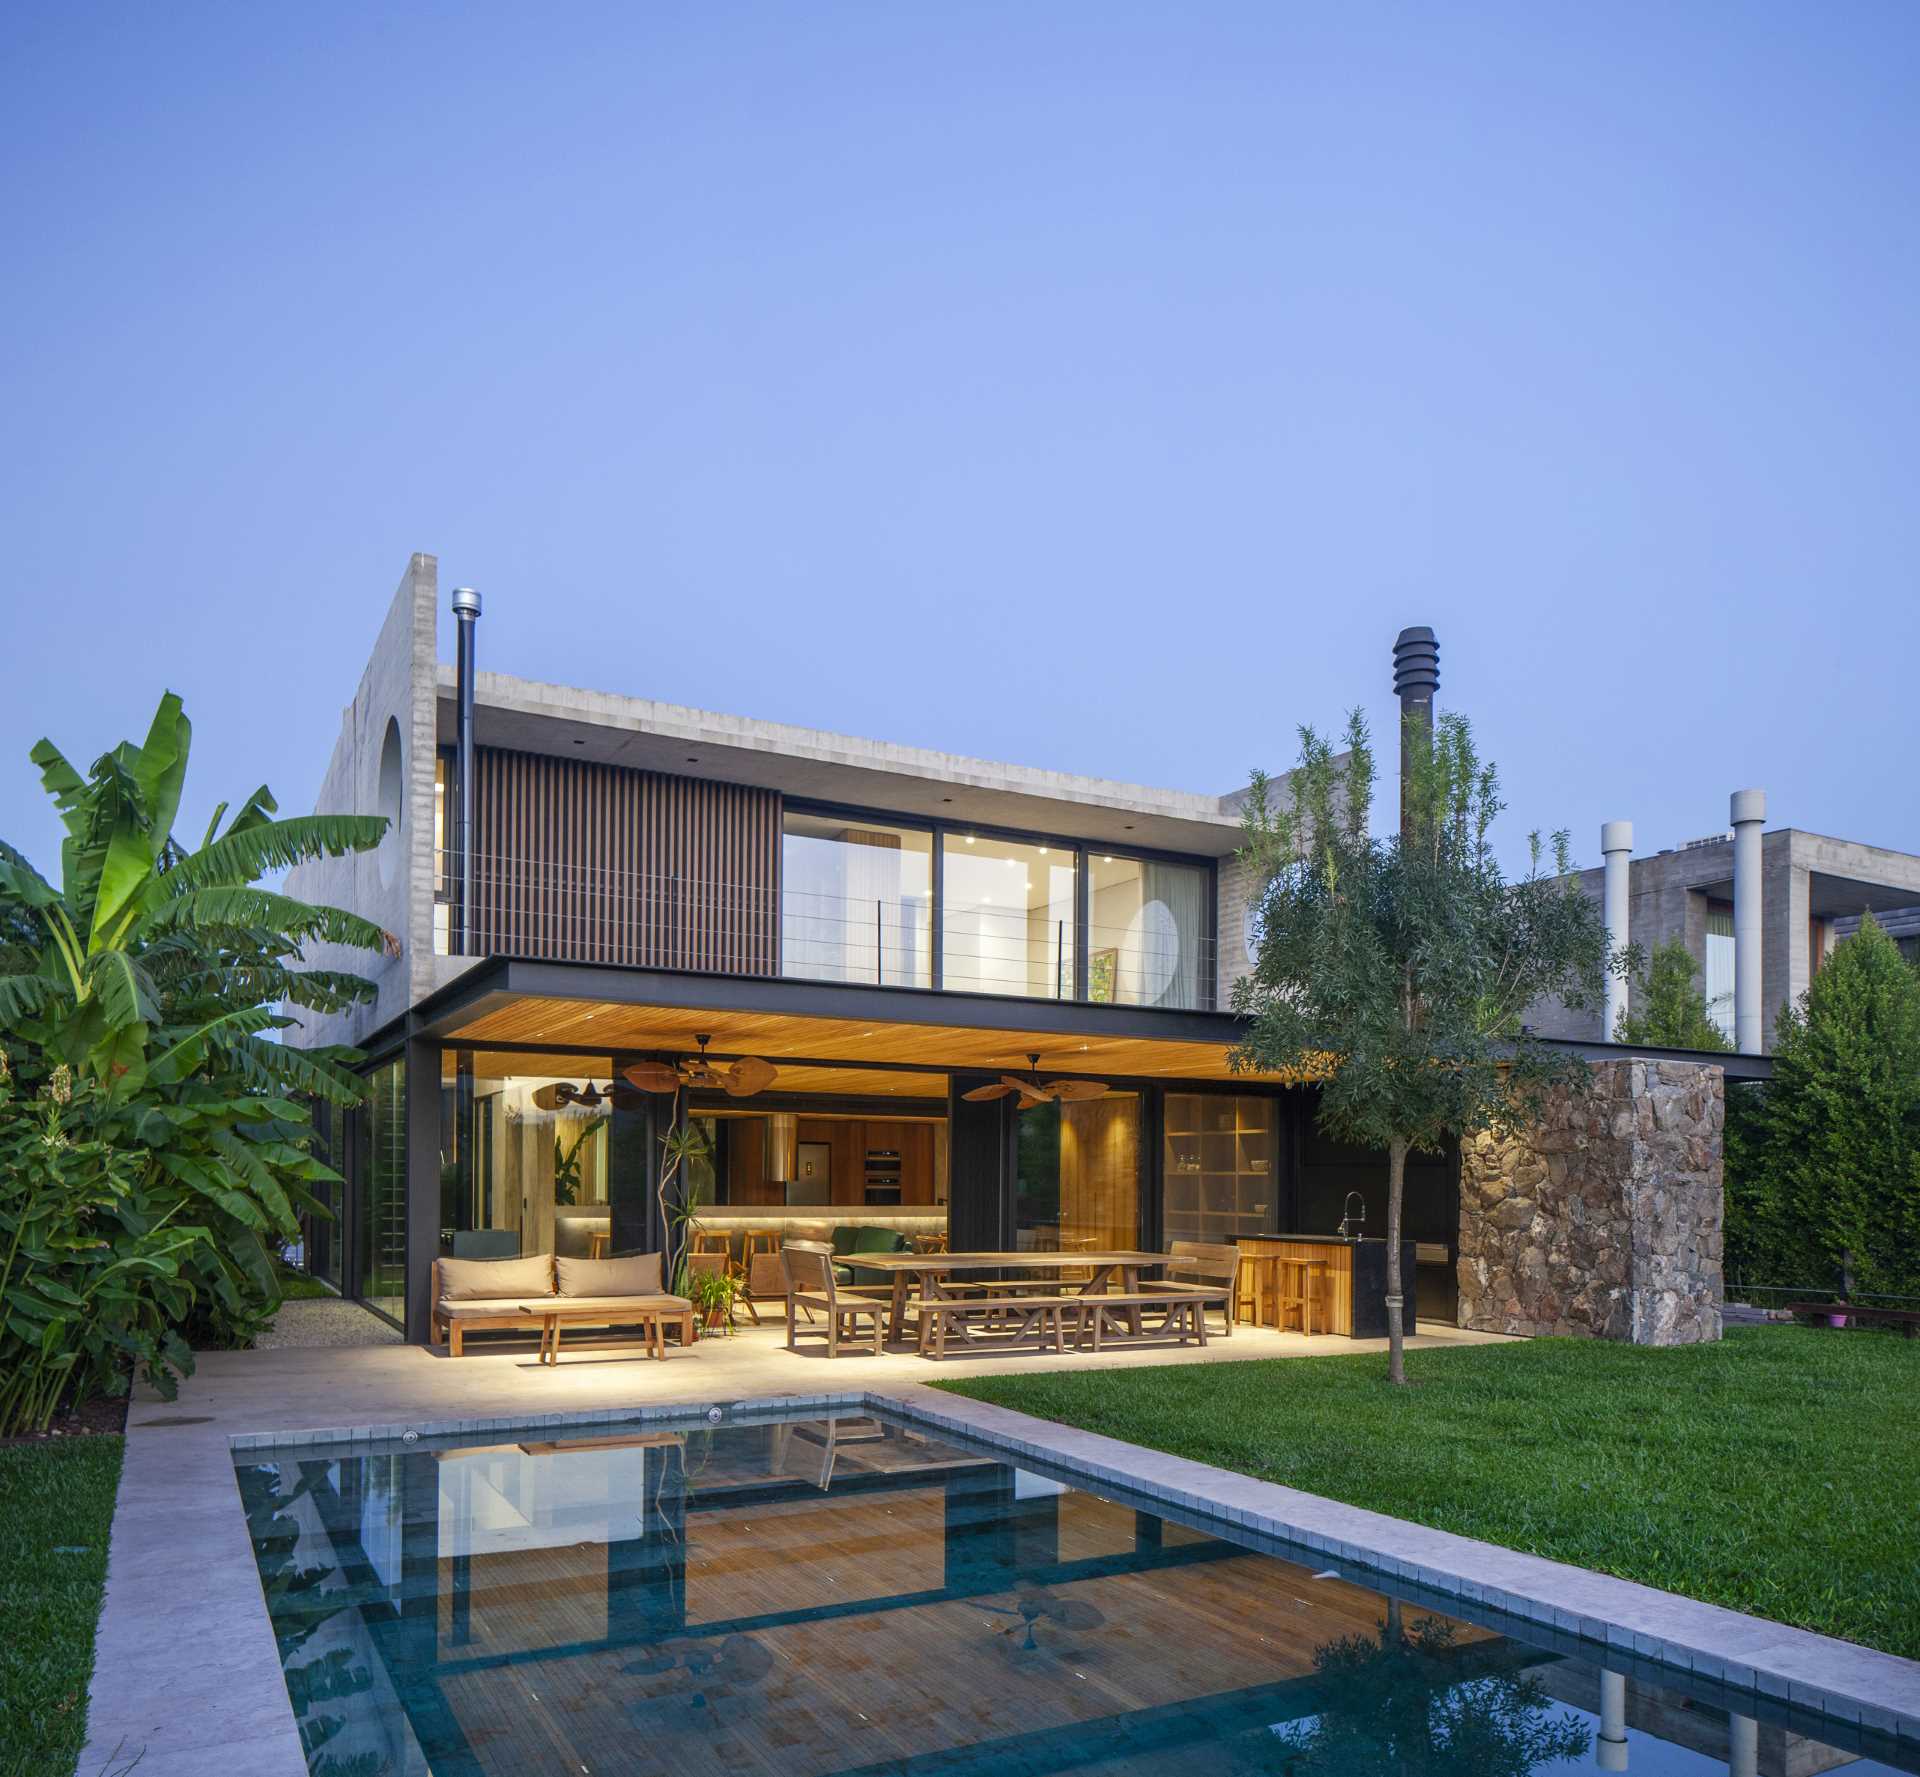 A modern stone and concrete home with a covered patio, pool, and yard.